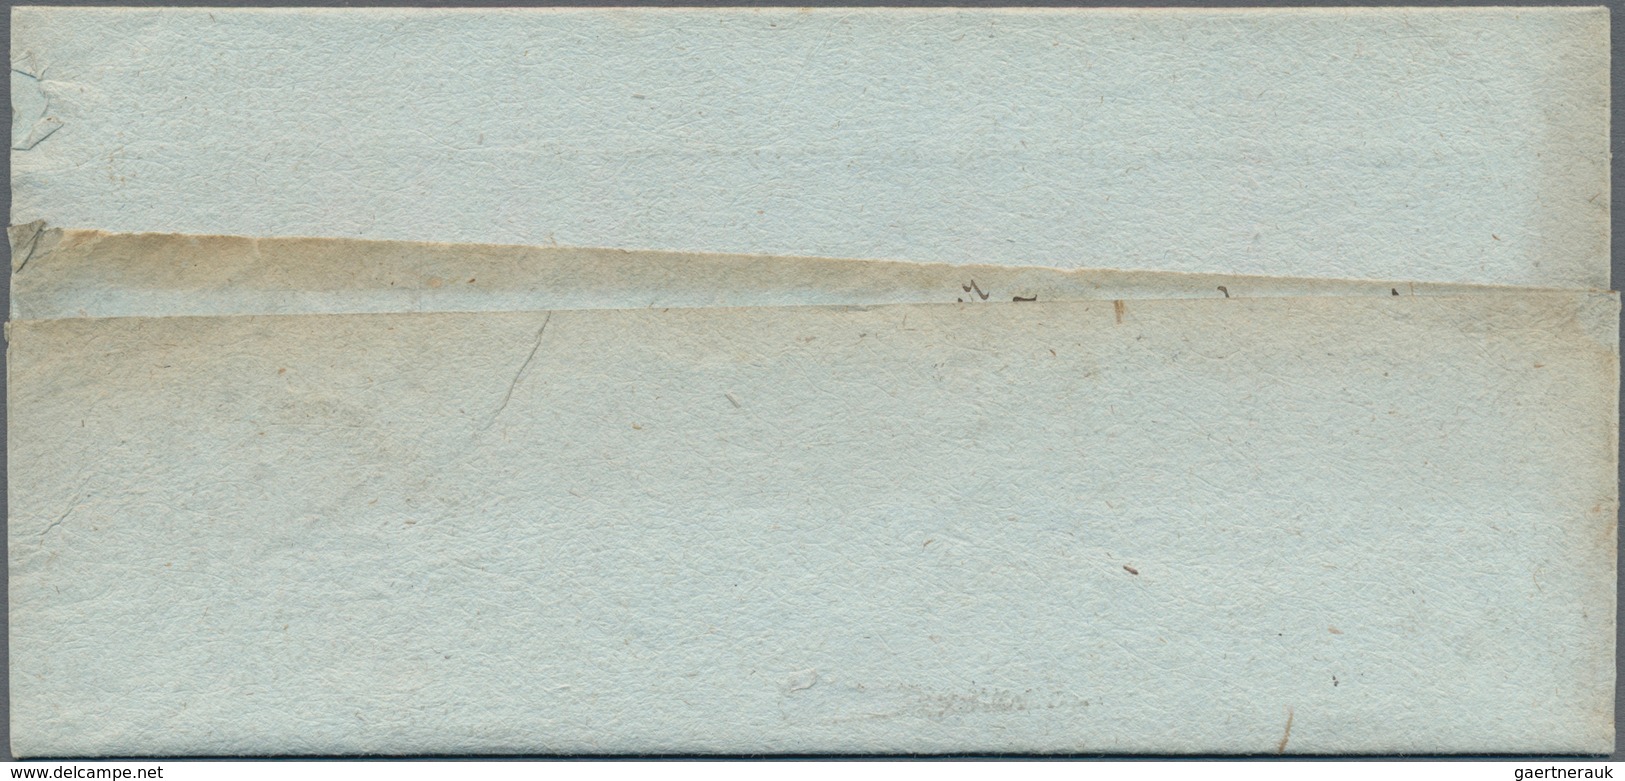 Frankreich - Vorphila: 1821/22 5 folded letters from a correspondence of Neuf Château (Vosges), part